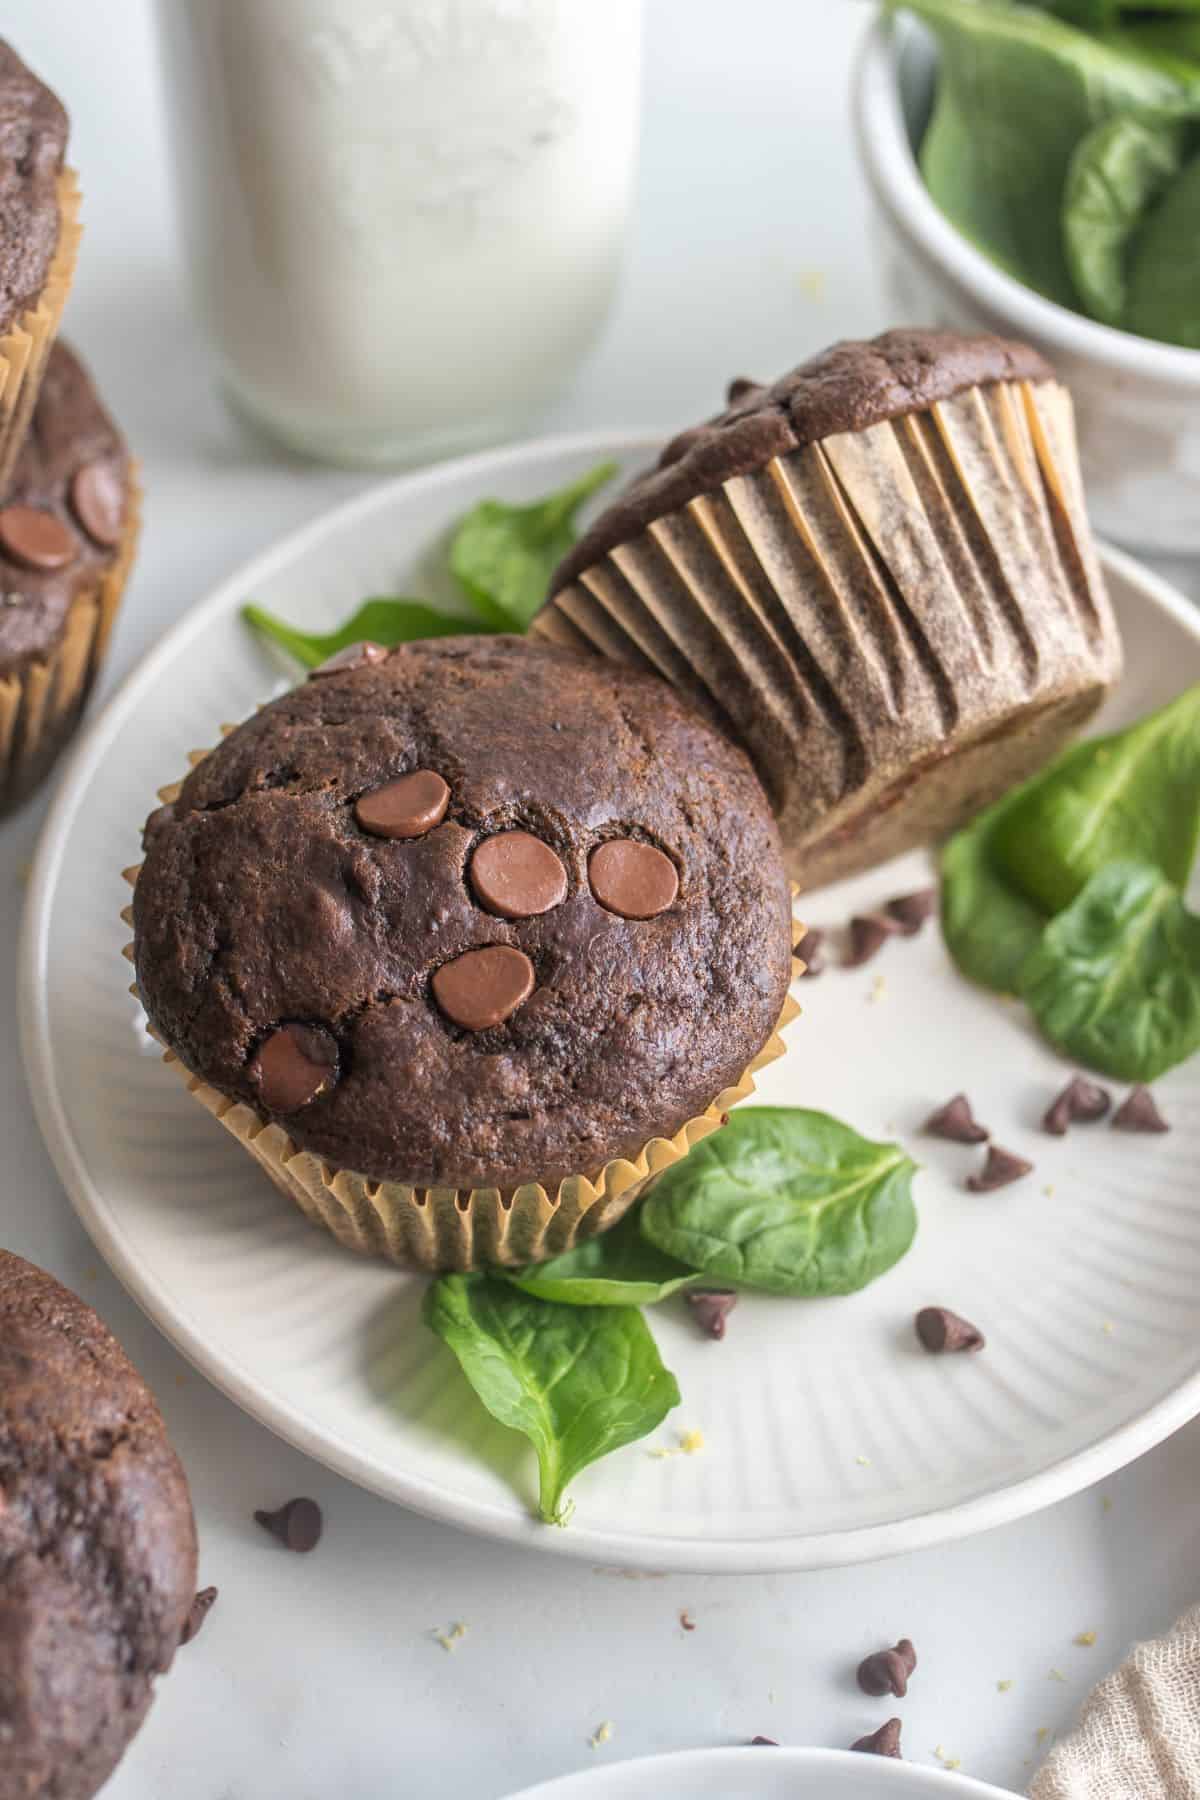 Two green smoothie chocolate muffins on a plate with spinach leaves around.